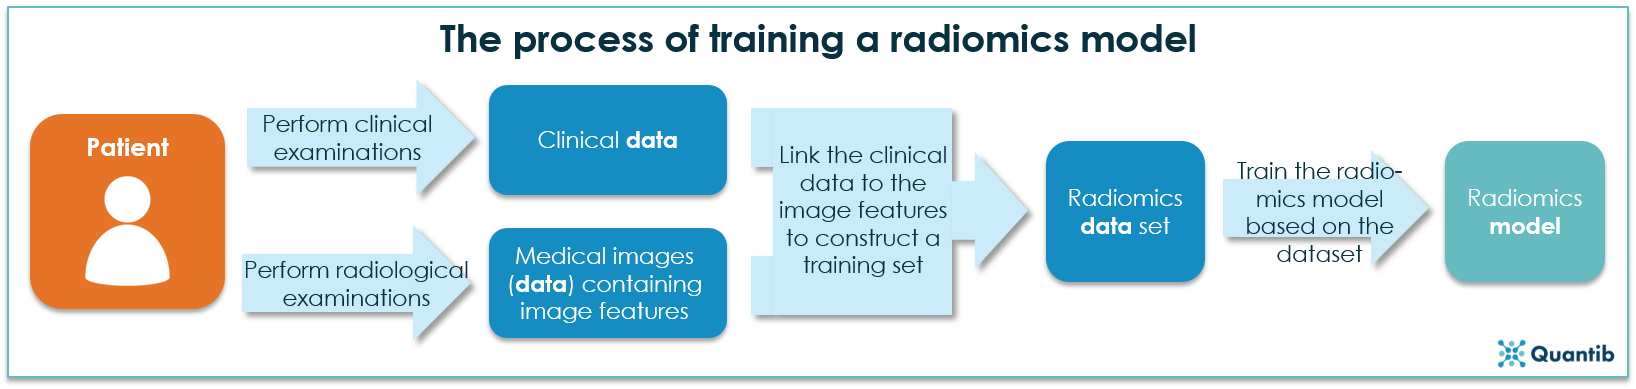 schematic example of the process of training a radiomics model